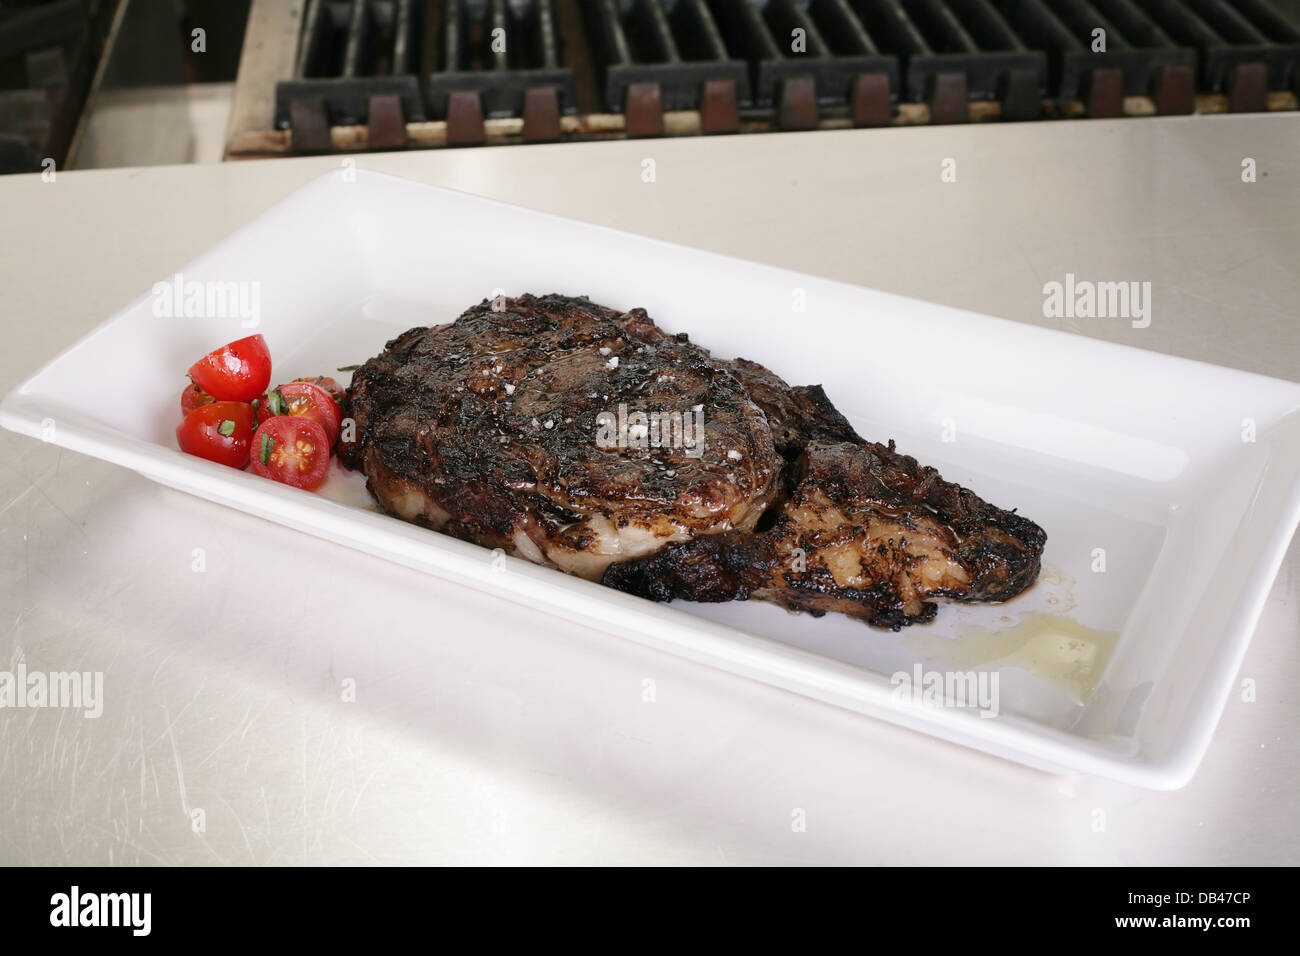 Rib-eye steak resting on the plate in the kitchen ready to serve Stock Photo